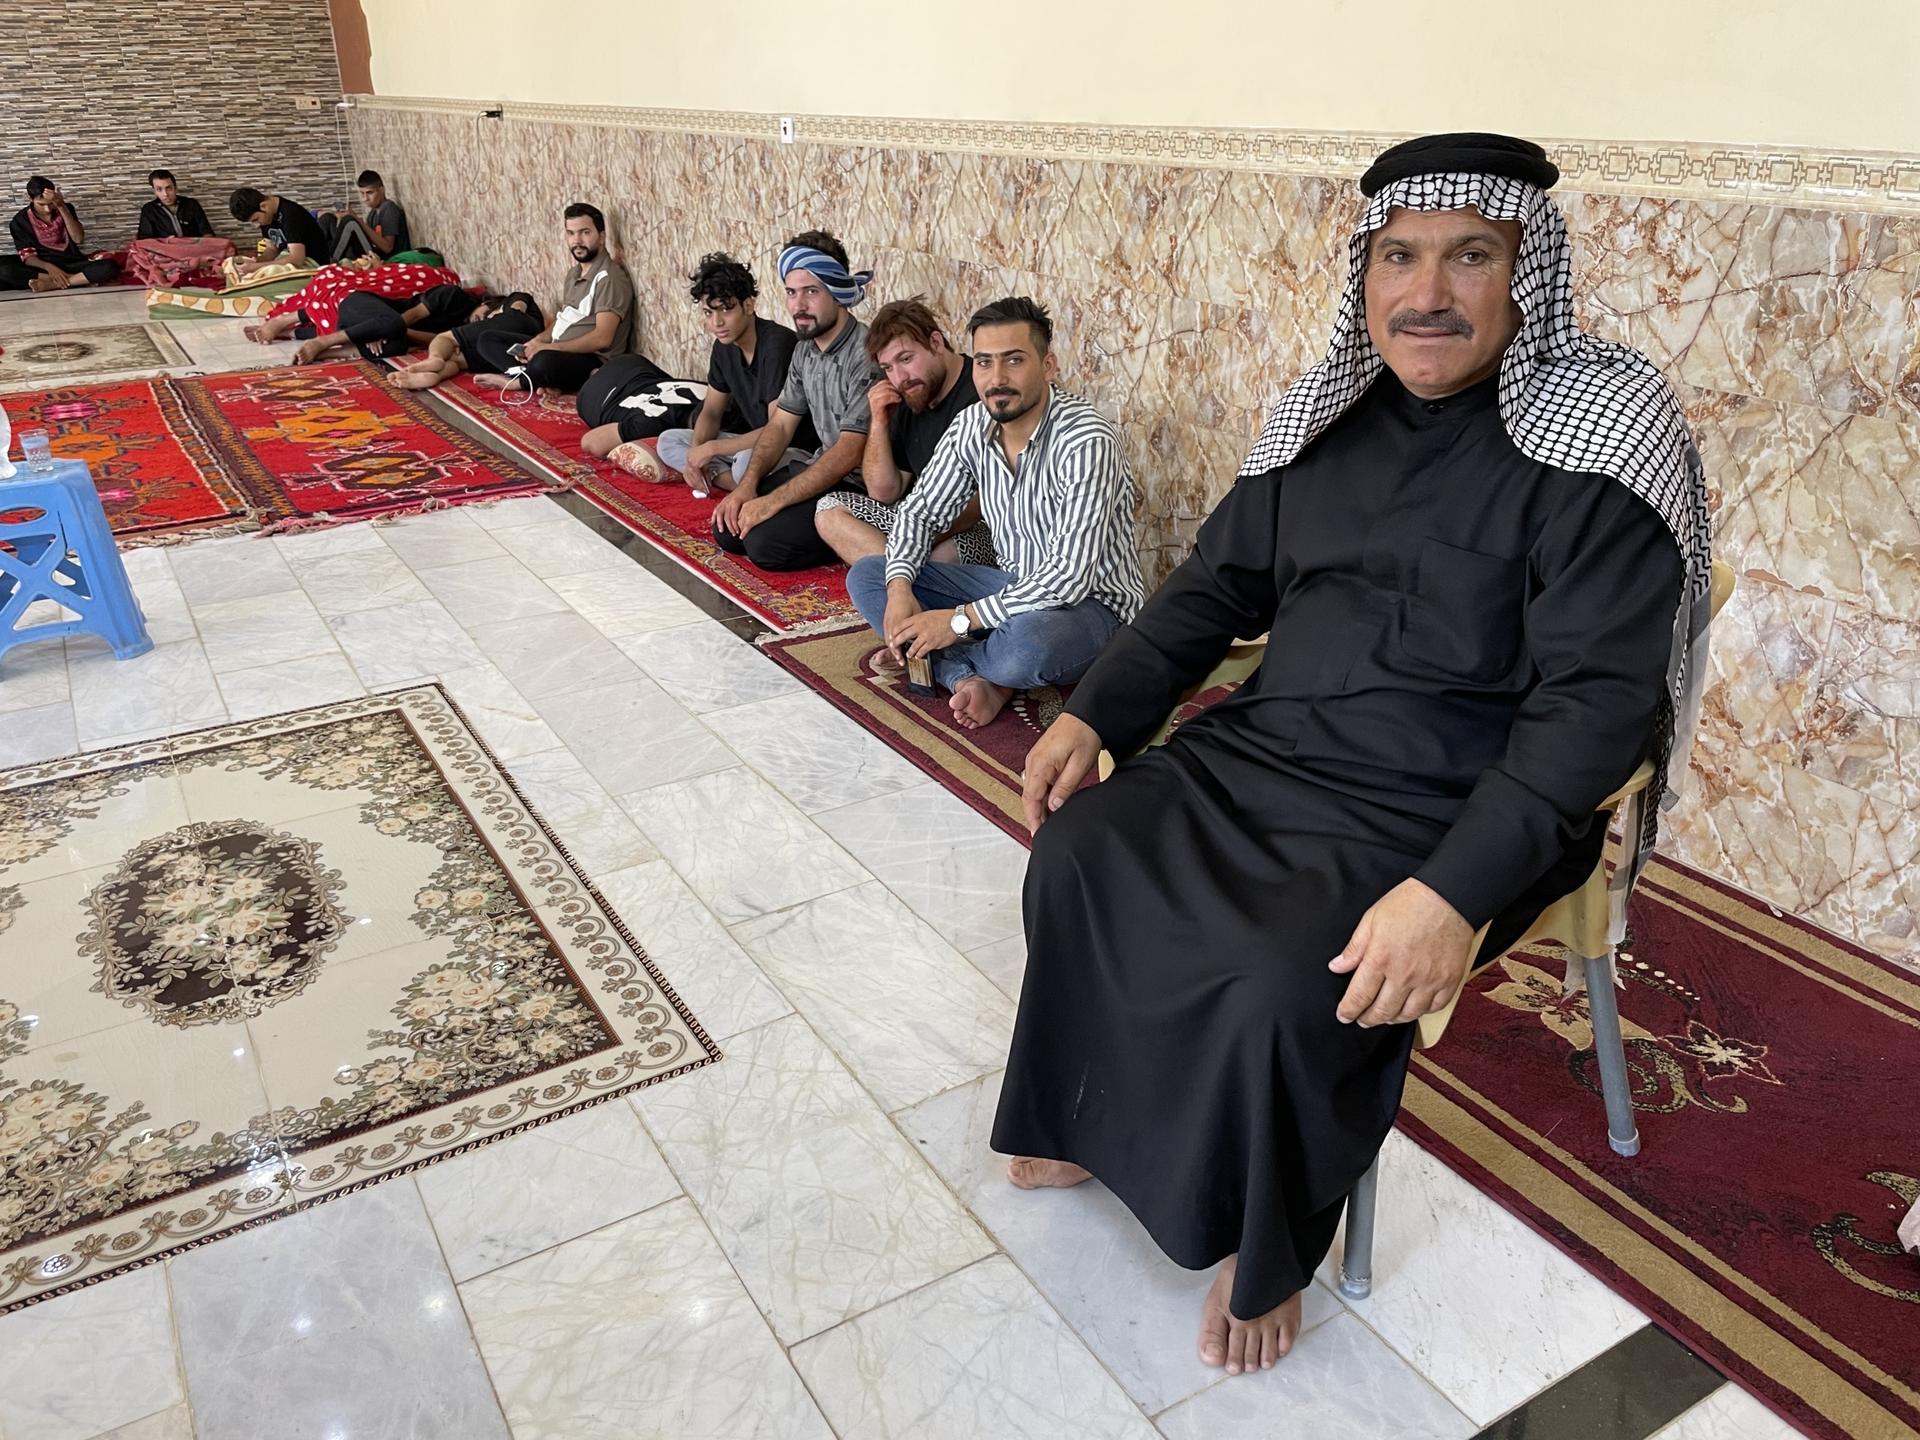 Local Iraqi tribe leader Shaykh Hassan al-Mas’udi opens his home to people on the Arbaeen walk to rest, shower and have home-cooked meals, September 2023.